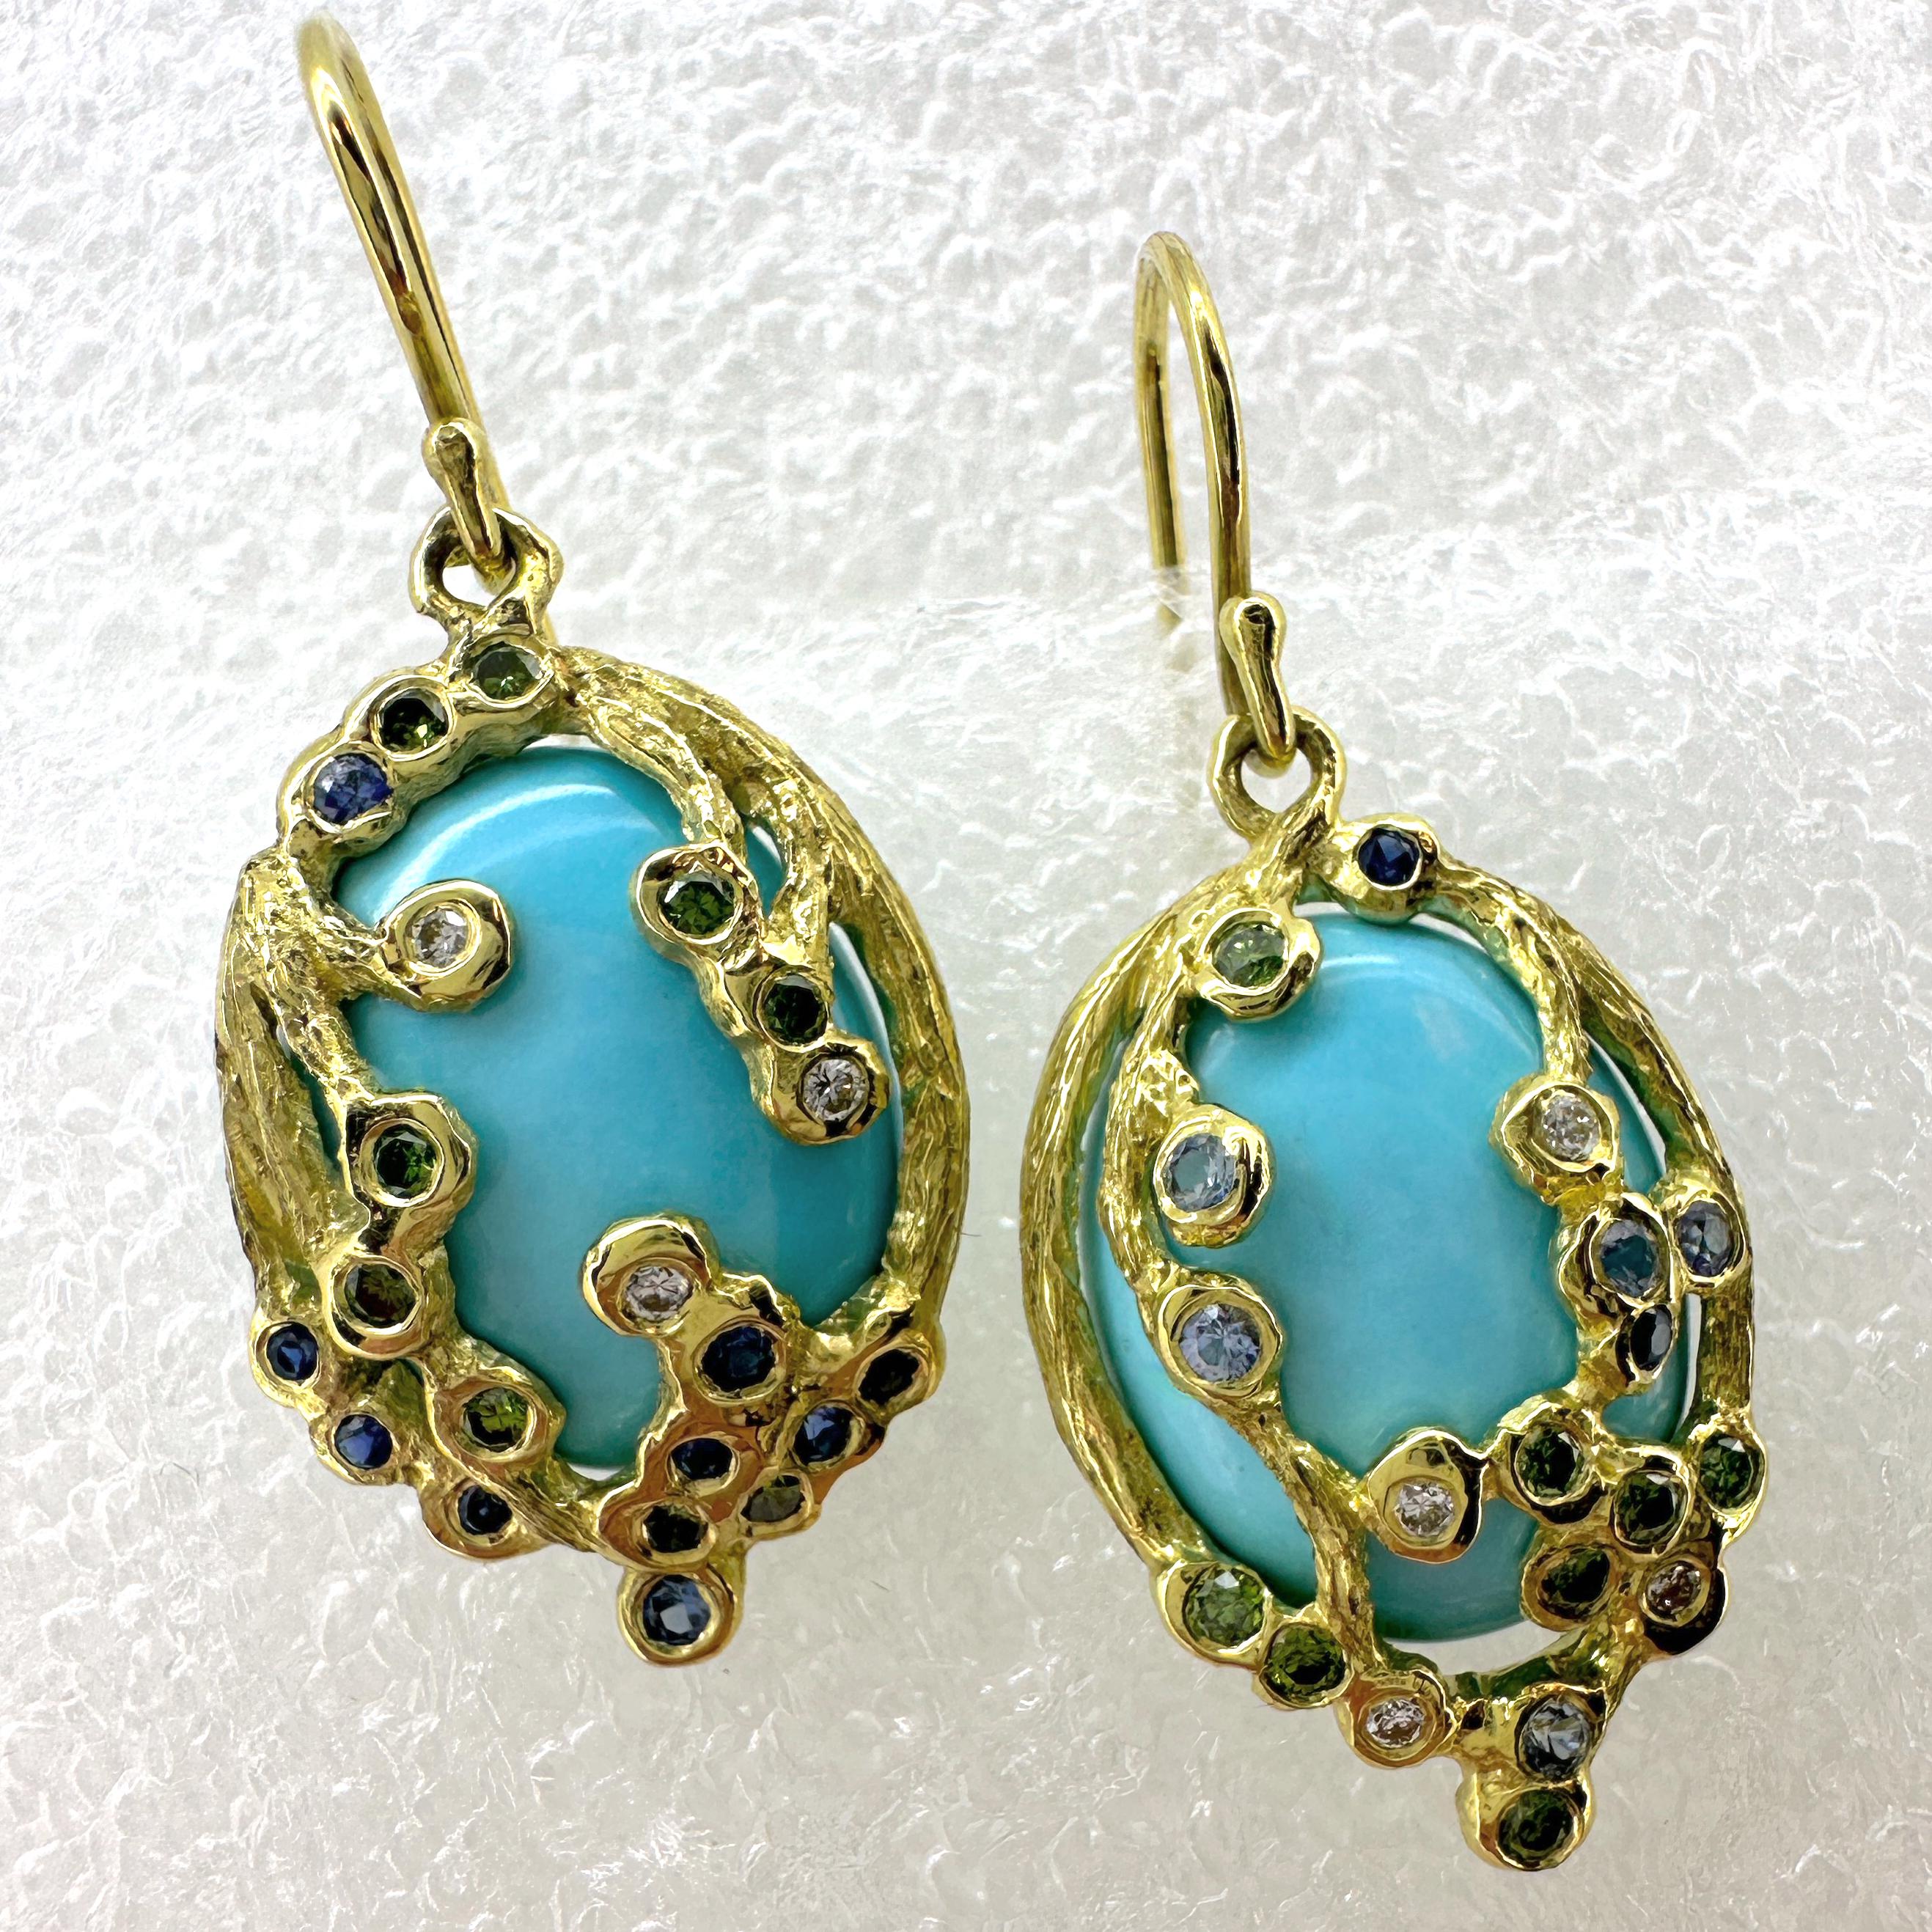 Sleeping Beauty Turquoise Earrings in 18 Karat Gold with Diamonds & Sapphires In New Condition For Sale In Sherman Oaks, CA